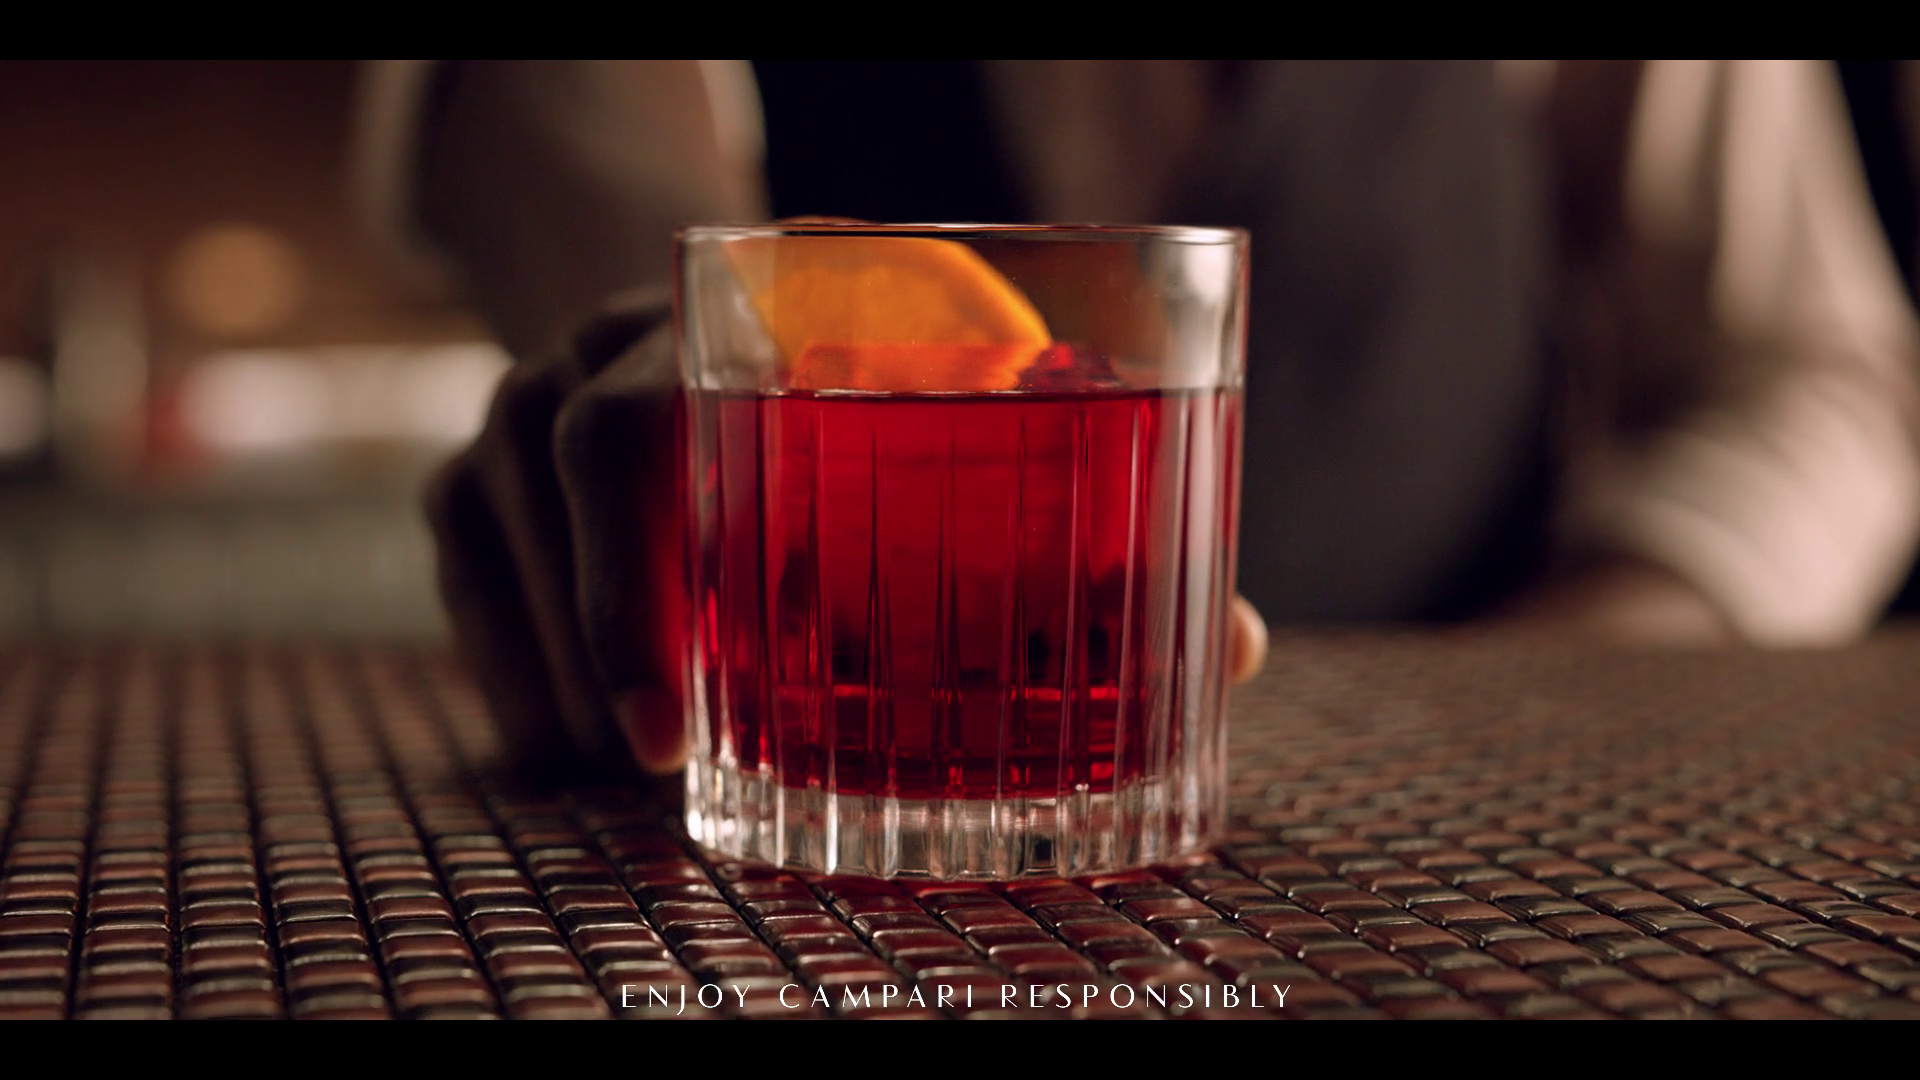 Campari Red Passion - Sound design and voice - Global and italian campaign